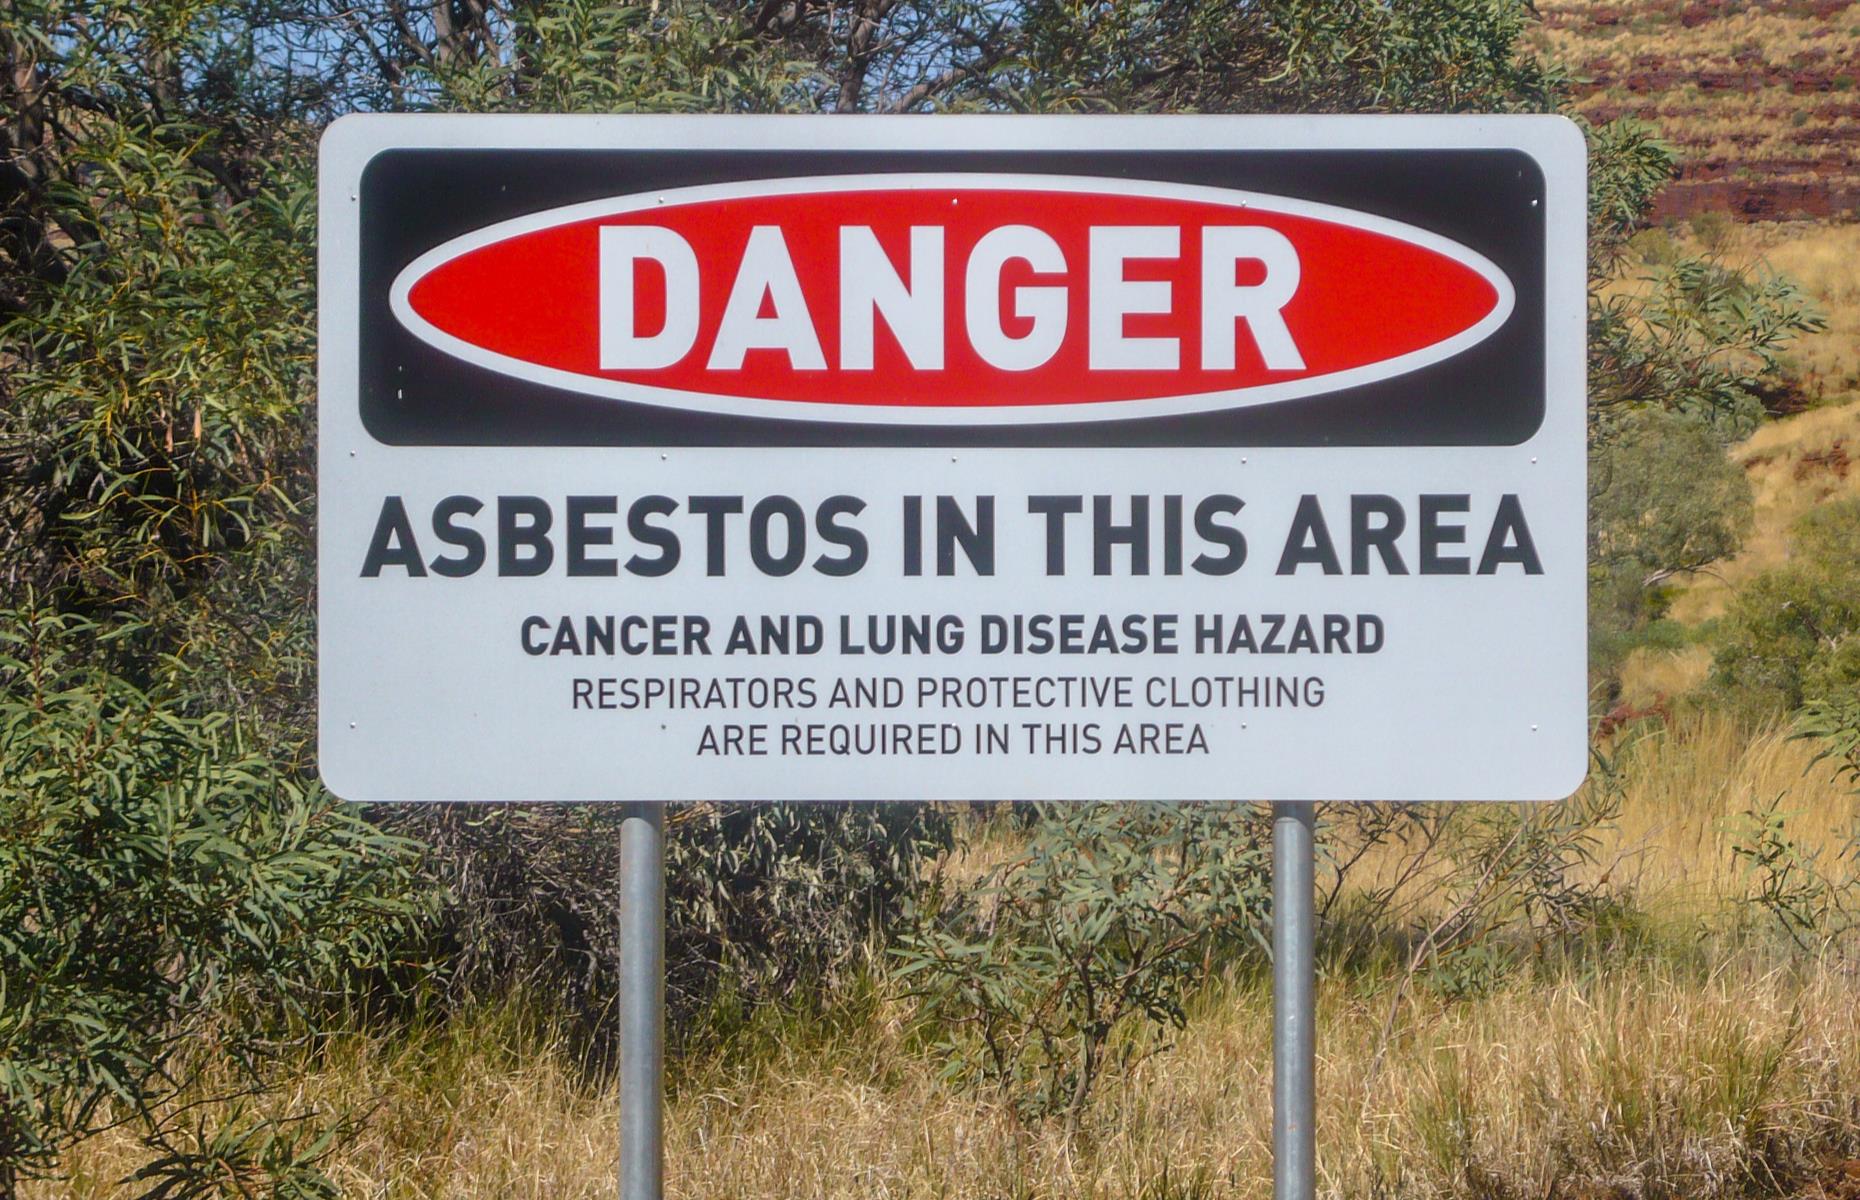 <p>From the 1930s to the 60s, Wittenoom was home to around 20,000 people, many of whom worked in Australia's only blue asbestos mine which was located there. More than 2,000 deaths have been linked to the town's toxic mining activities, and the mine subsequently closed its doors for good in 1966.</p>